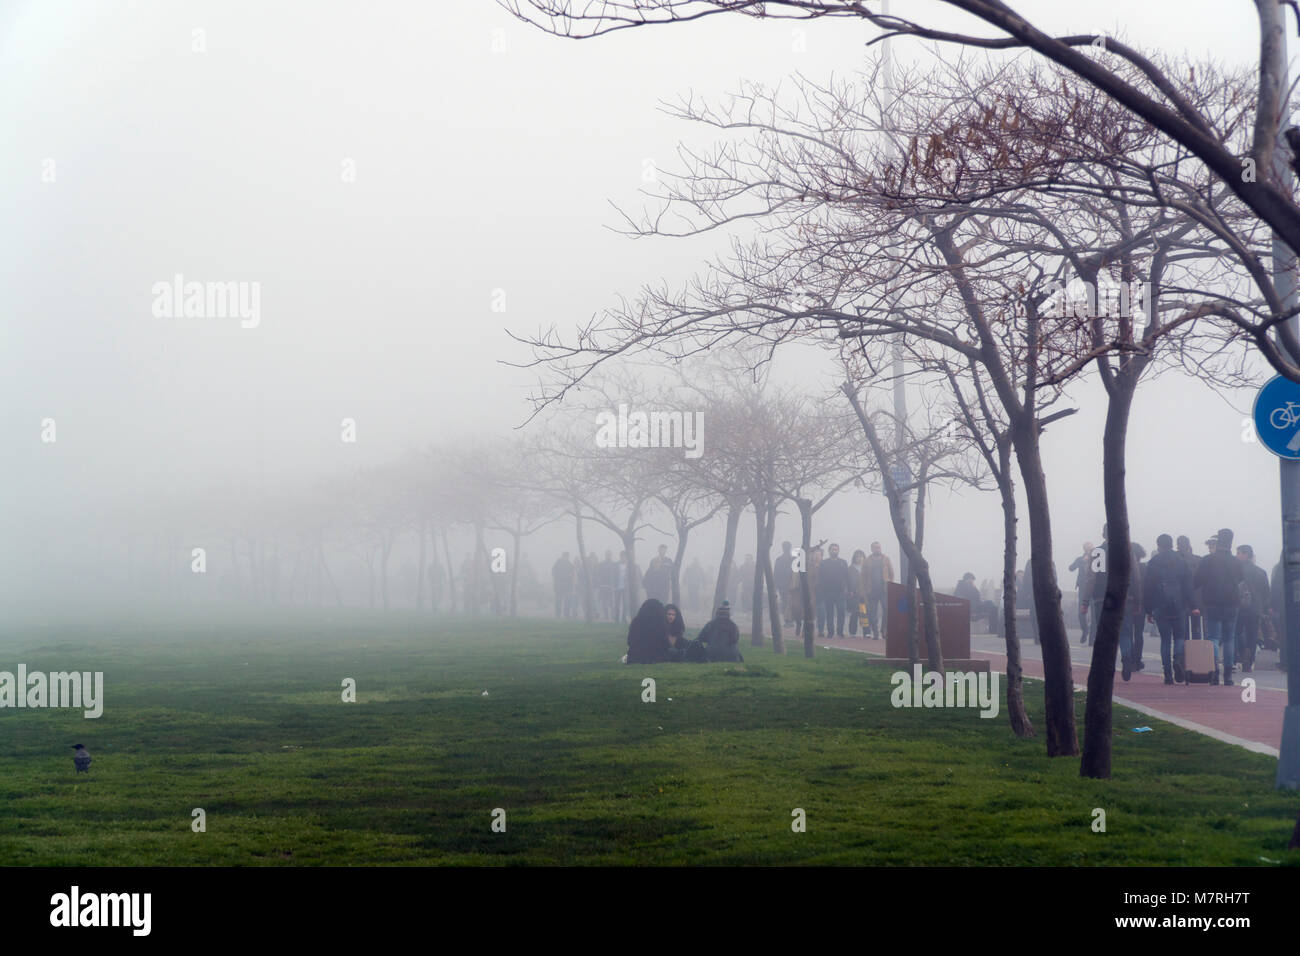 Istanbul, Turkey - March 10, 2018 : A cold foggy weekend at Istanbul, Kadikoy. Many people are walking at the park and three teen girls are sitting. Stock Photo